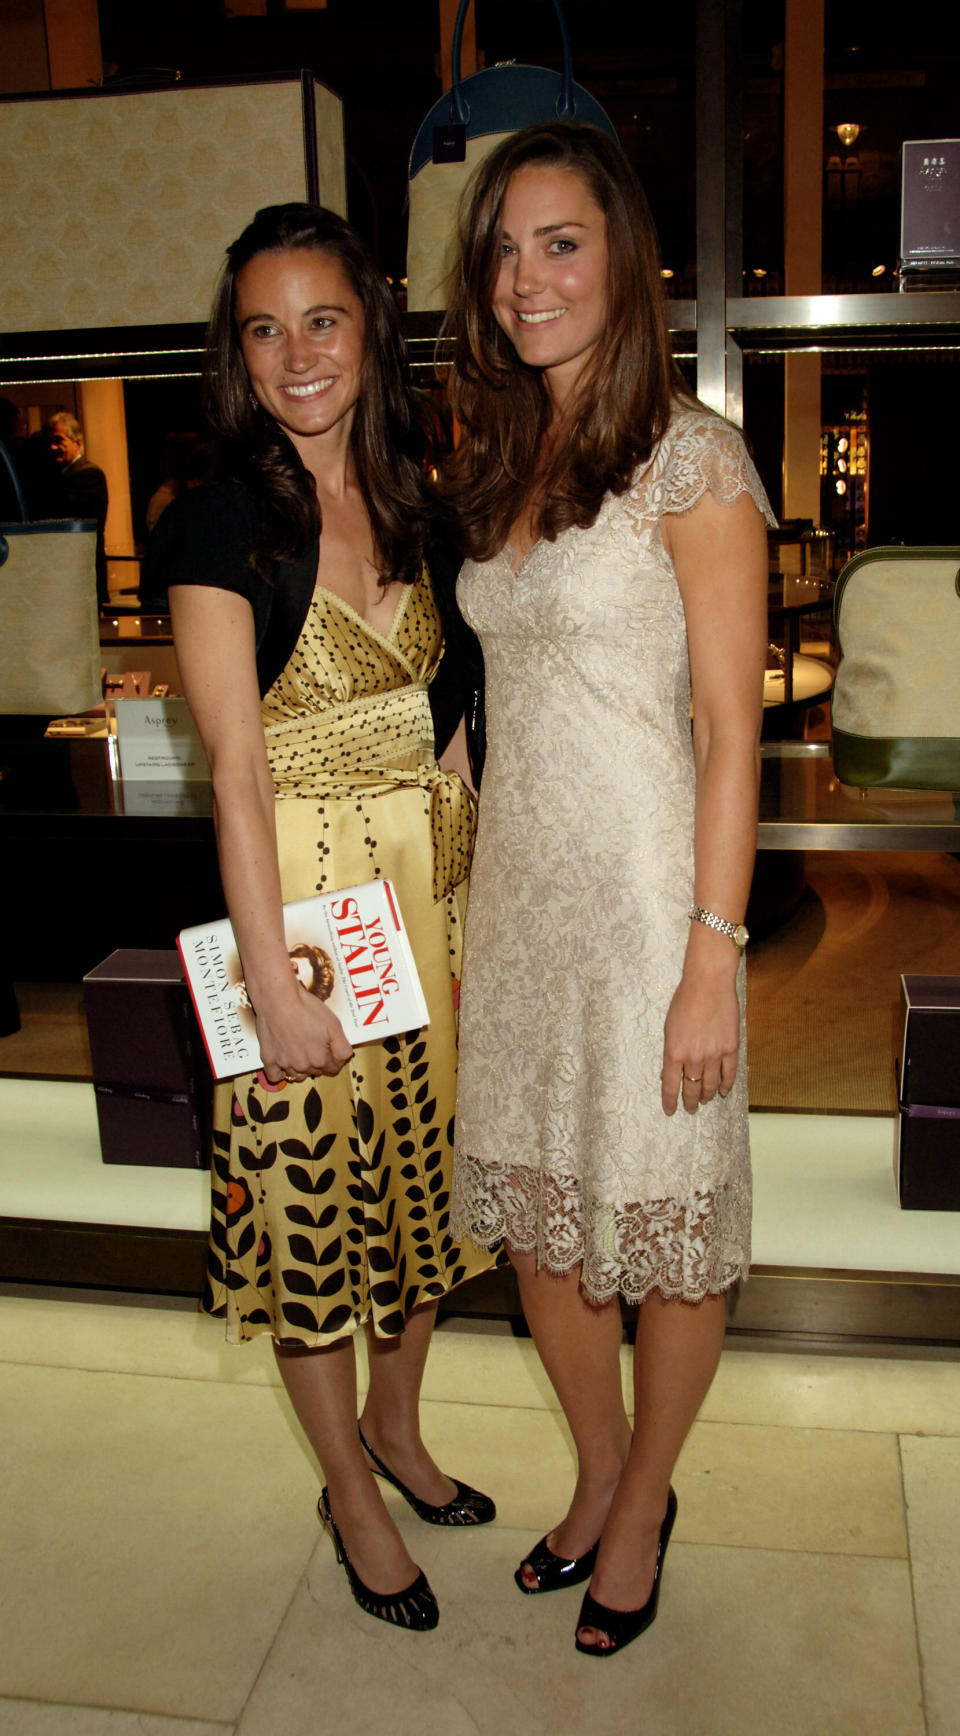 The Middleton sisters attend a book launch party for "The Young Stalin" by Simon Sebag Montefiore on May 14, 2007, in London.